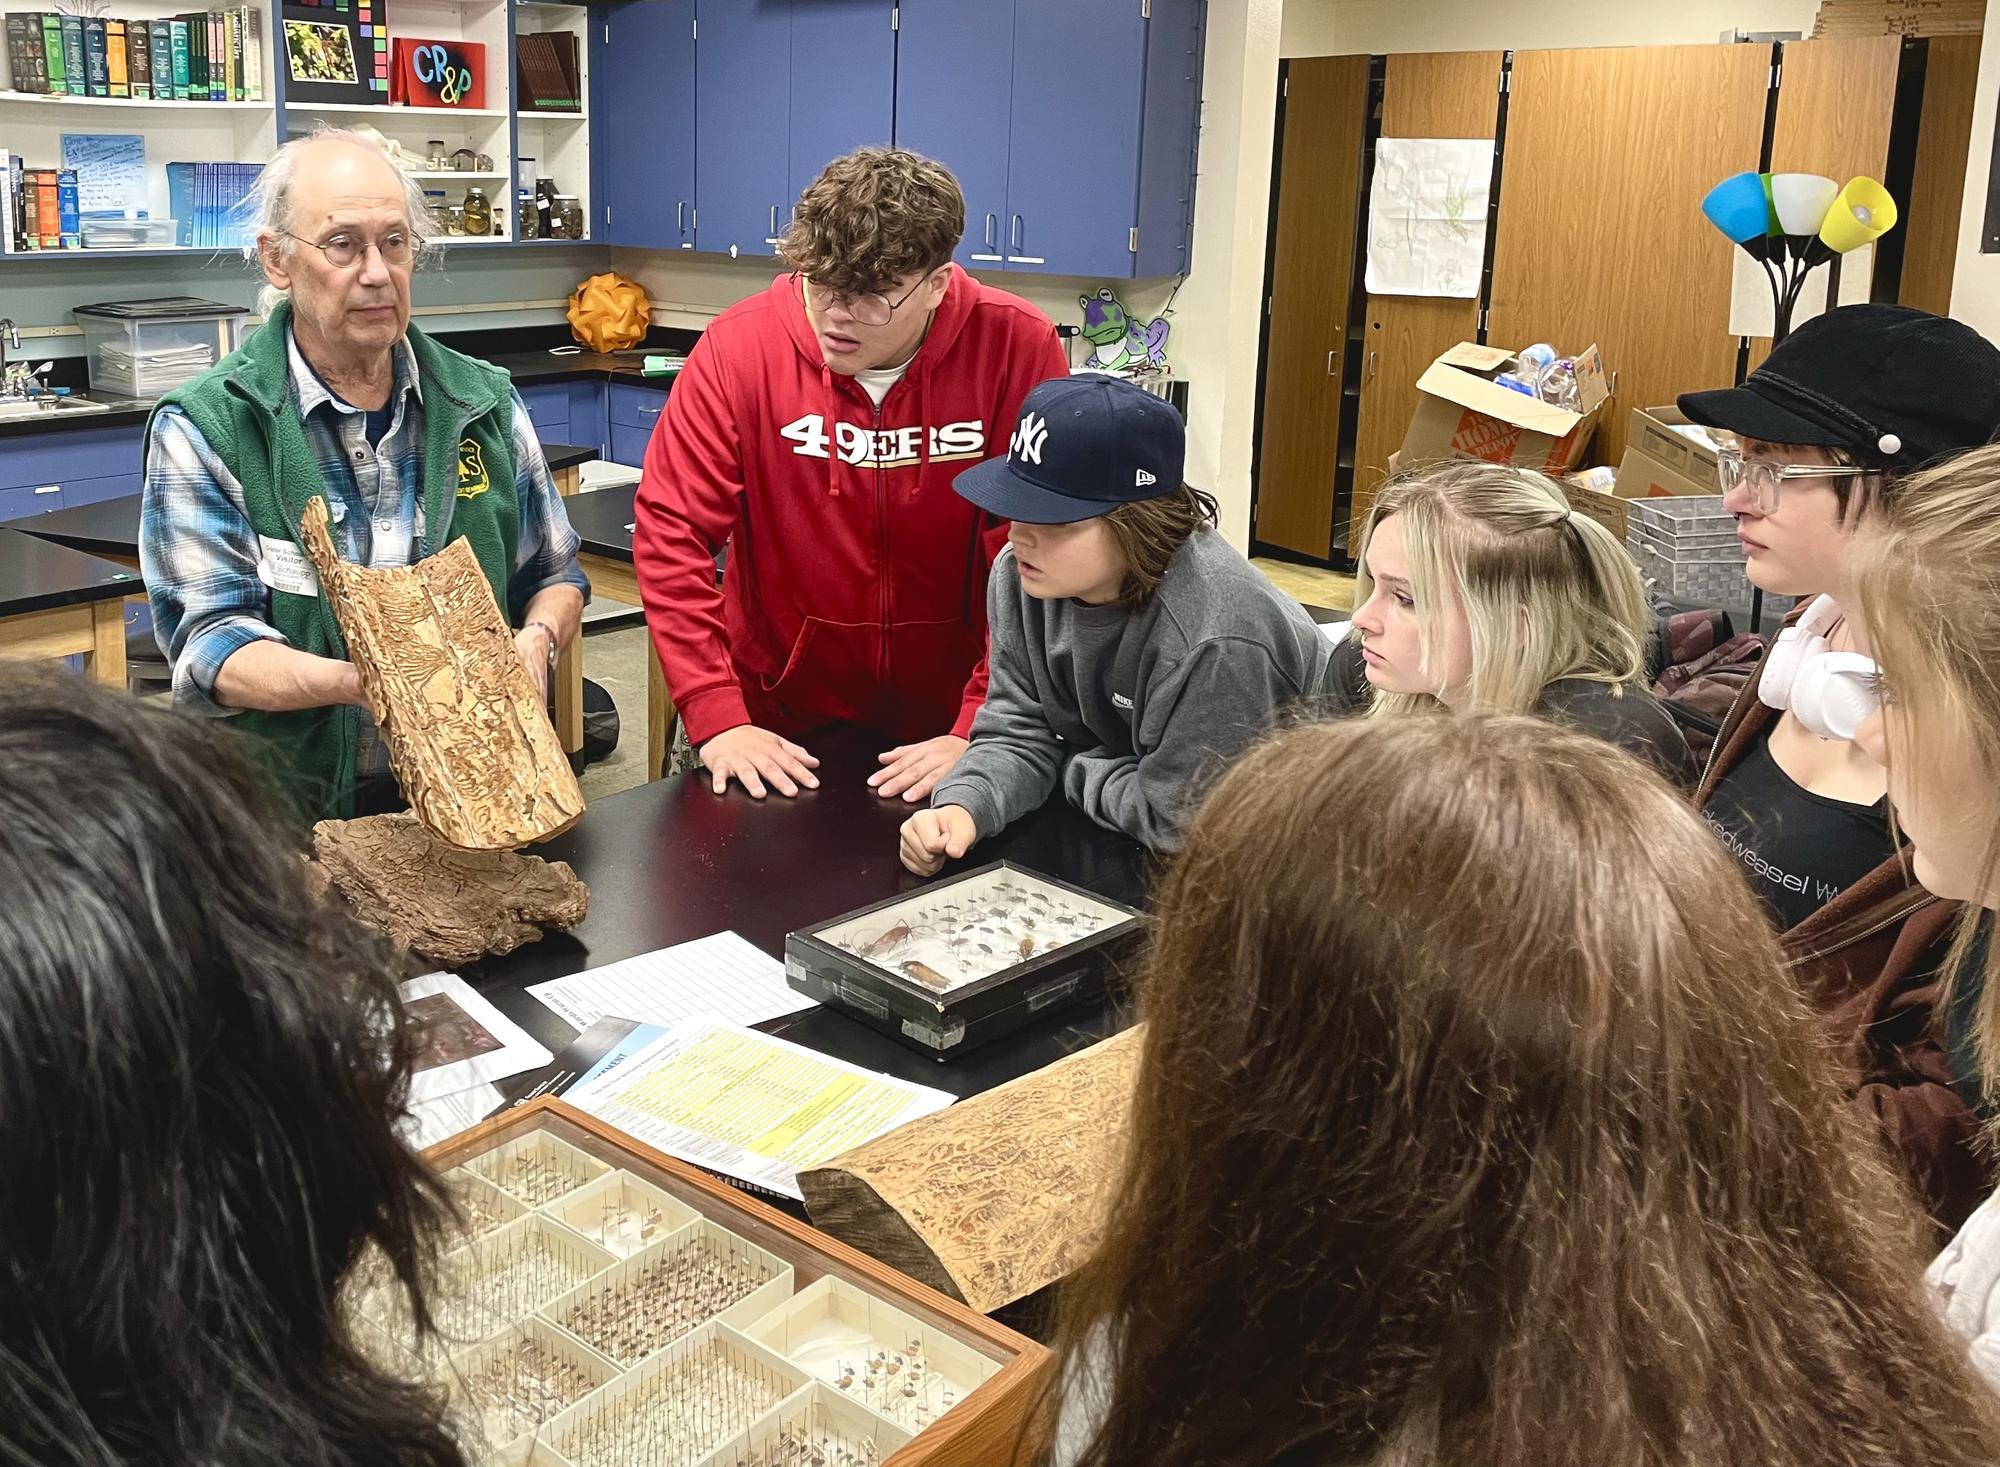 Students gather around a table to look at a section of wood damaged by insects